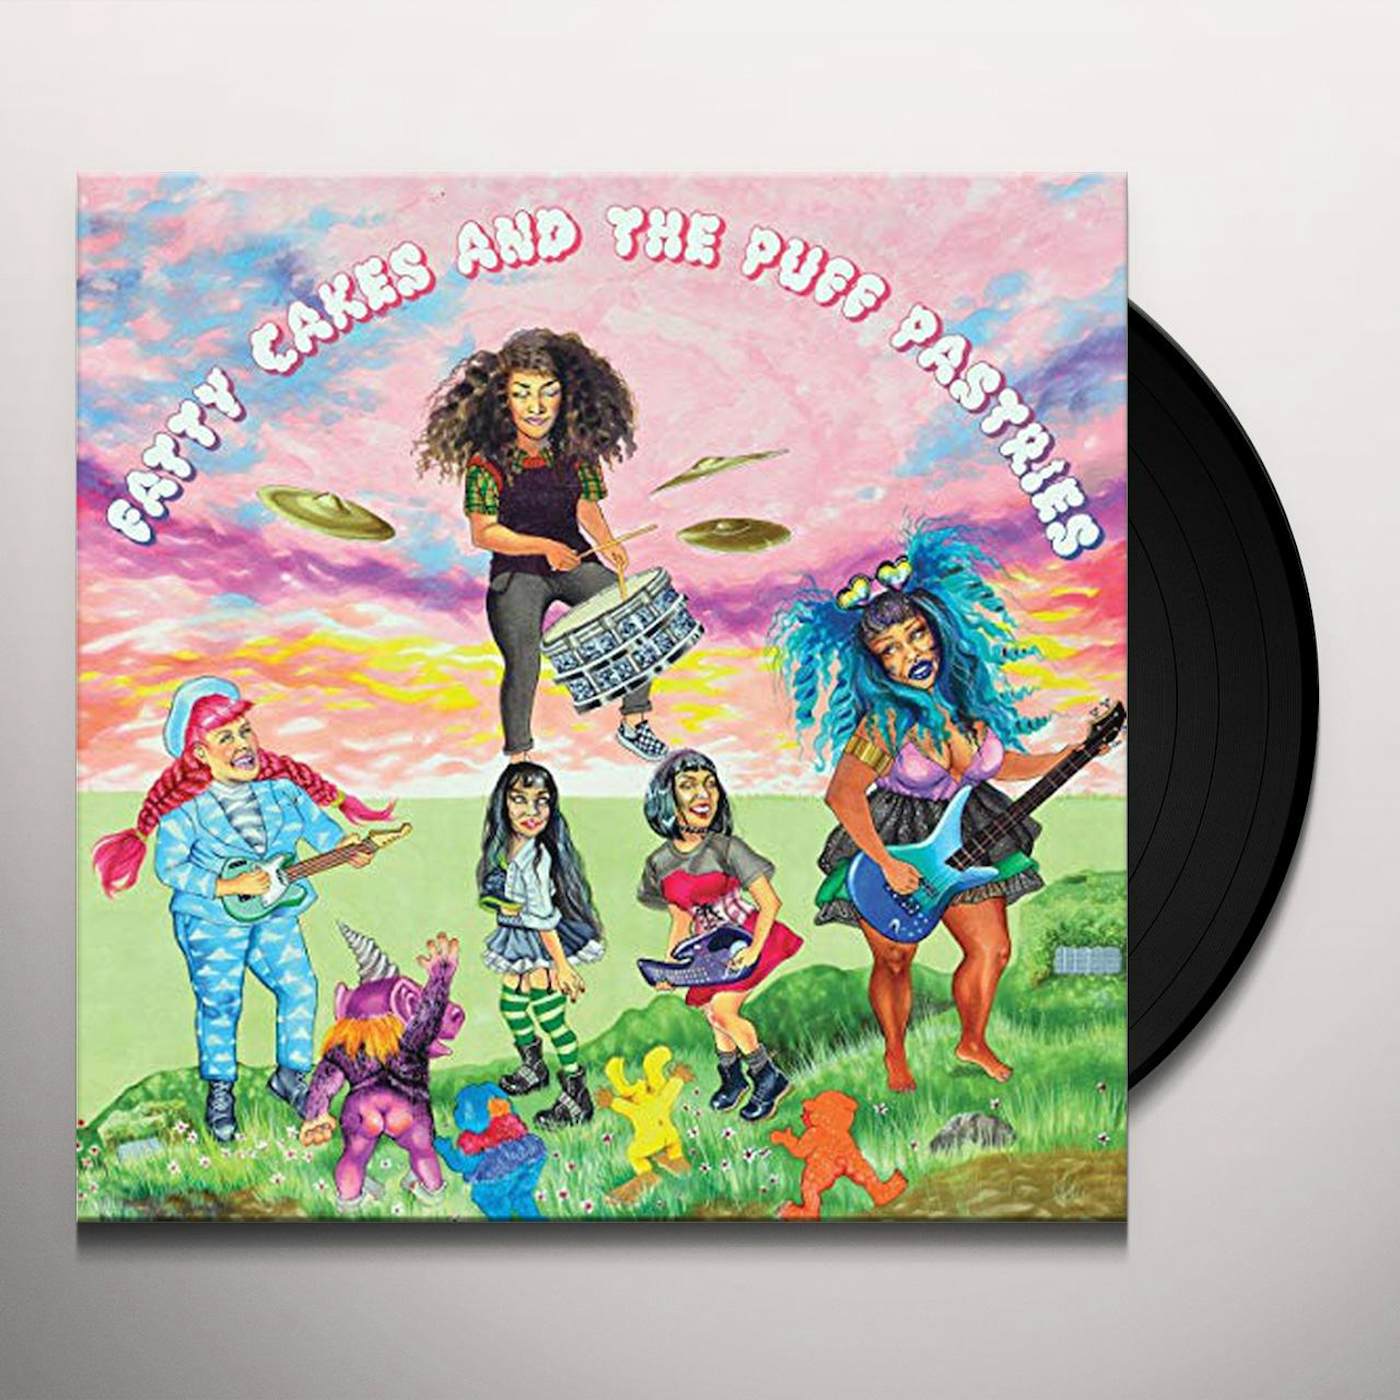 Fatty Cakes and the Puff Pastries Vinyl Record